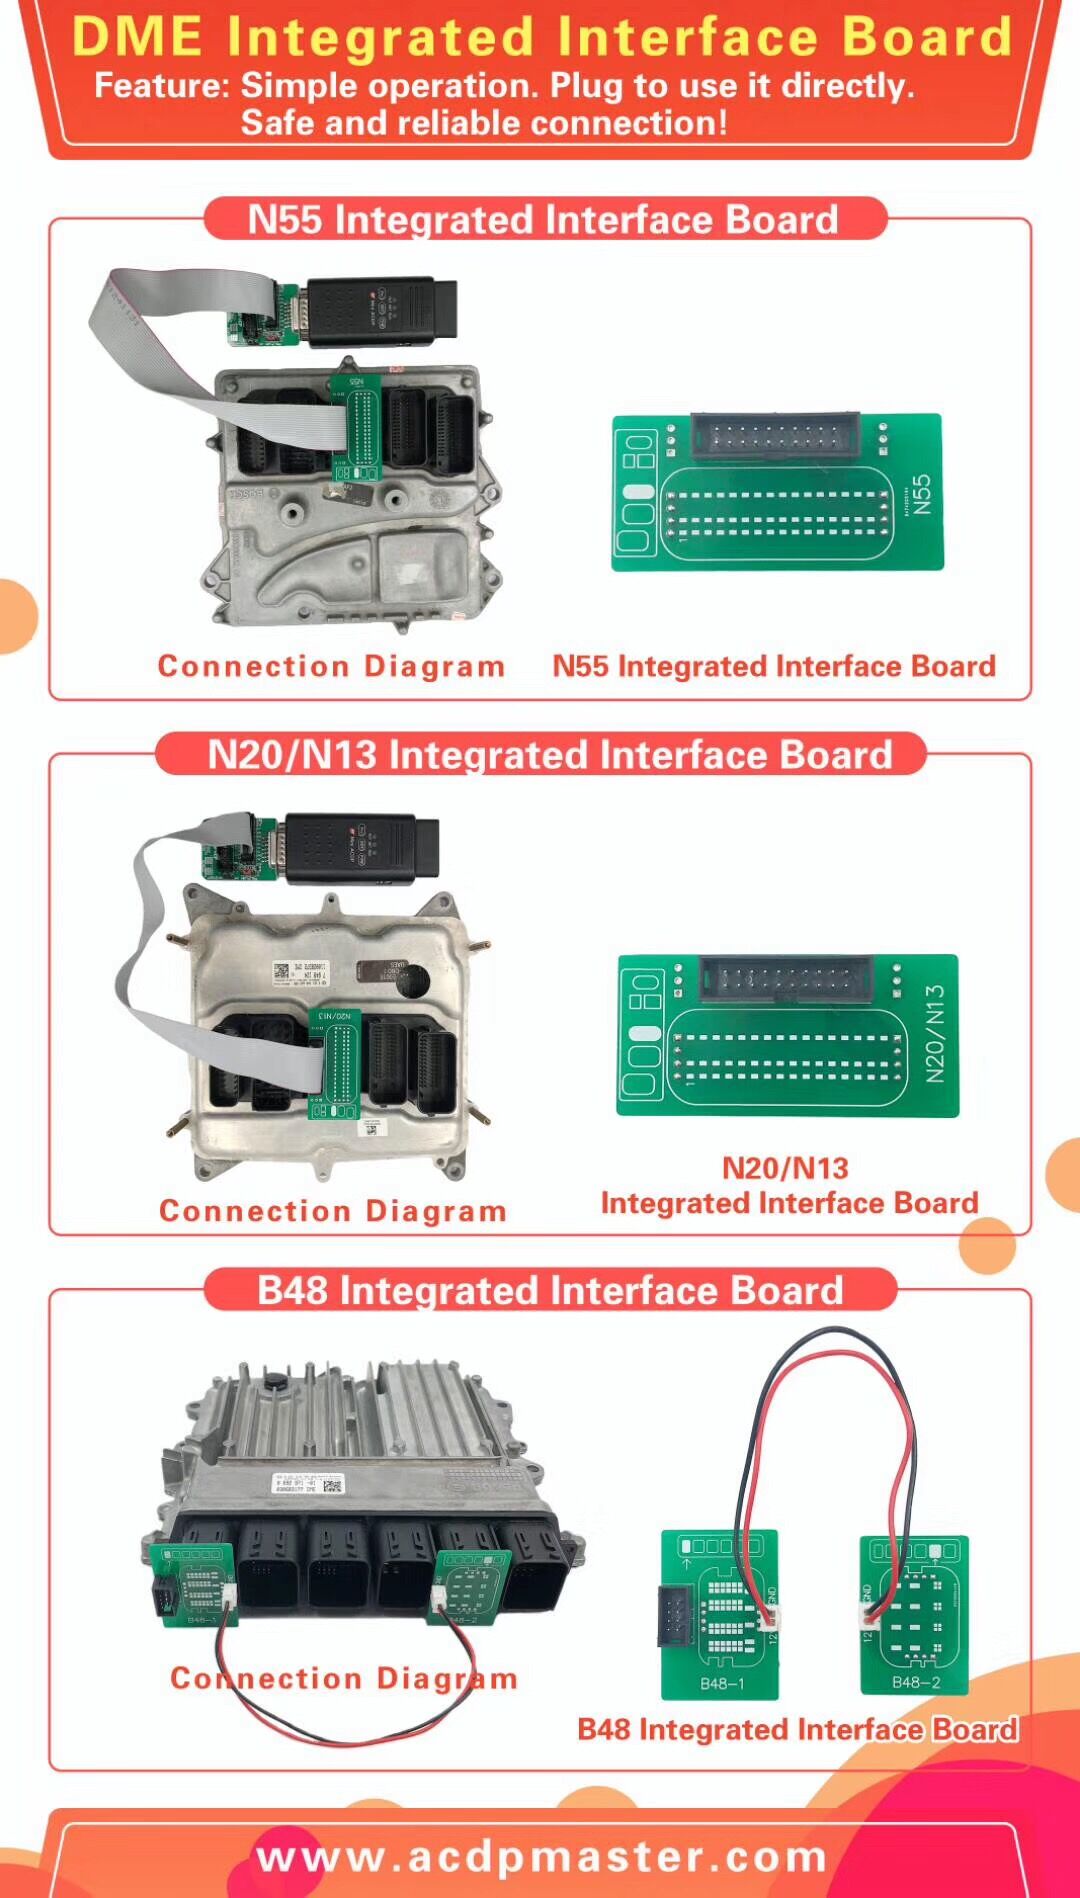 DME Integrated Interface Board